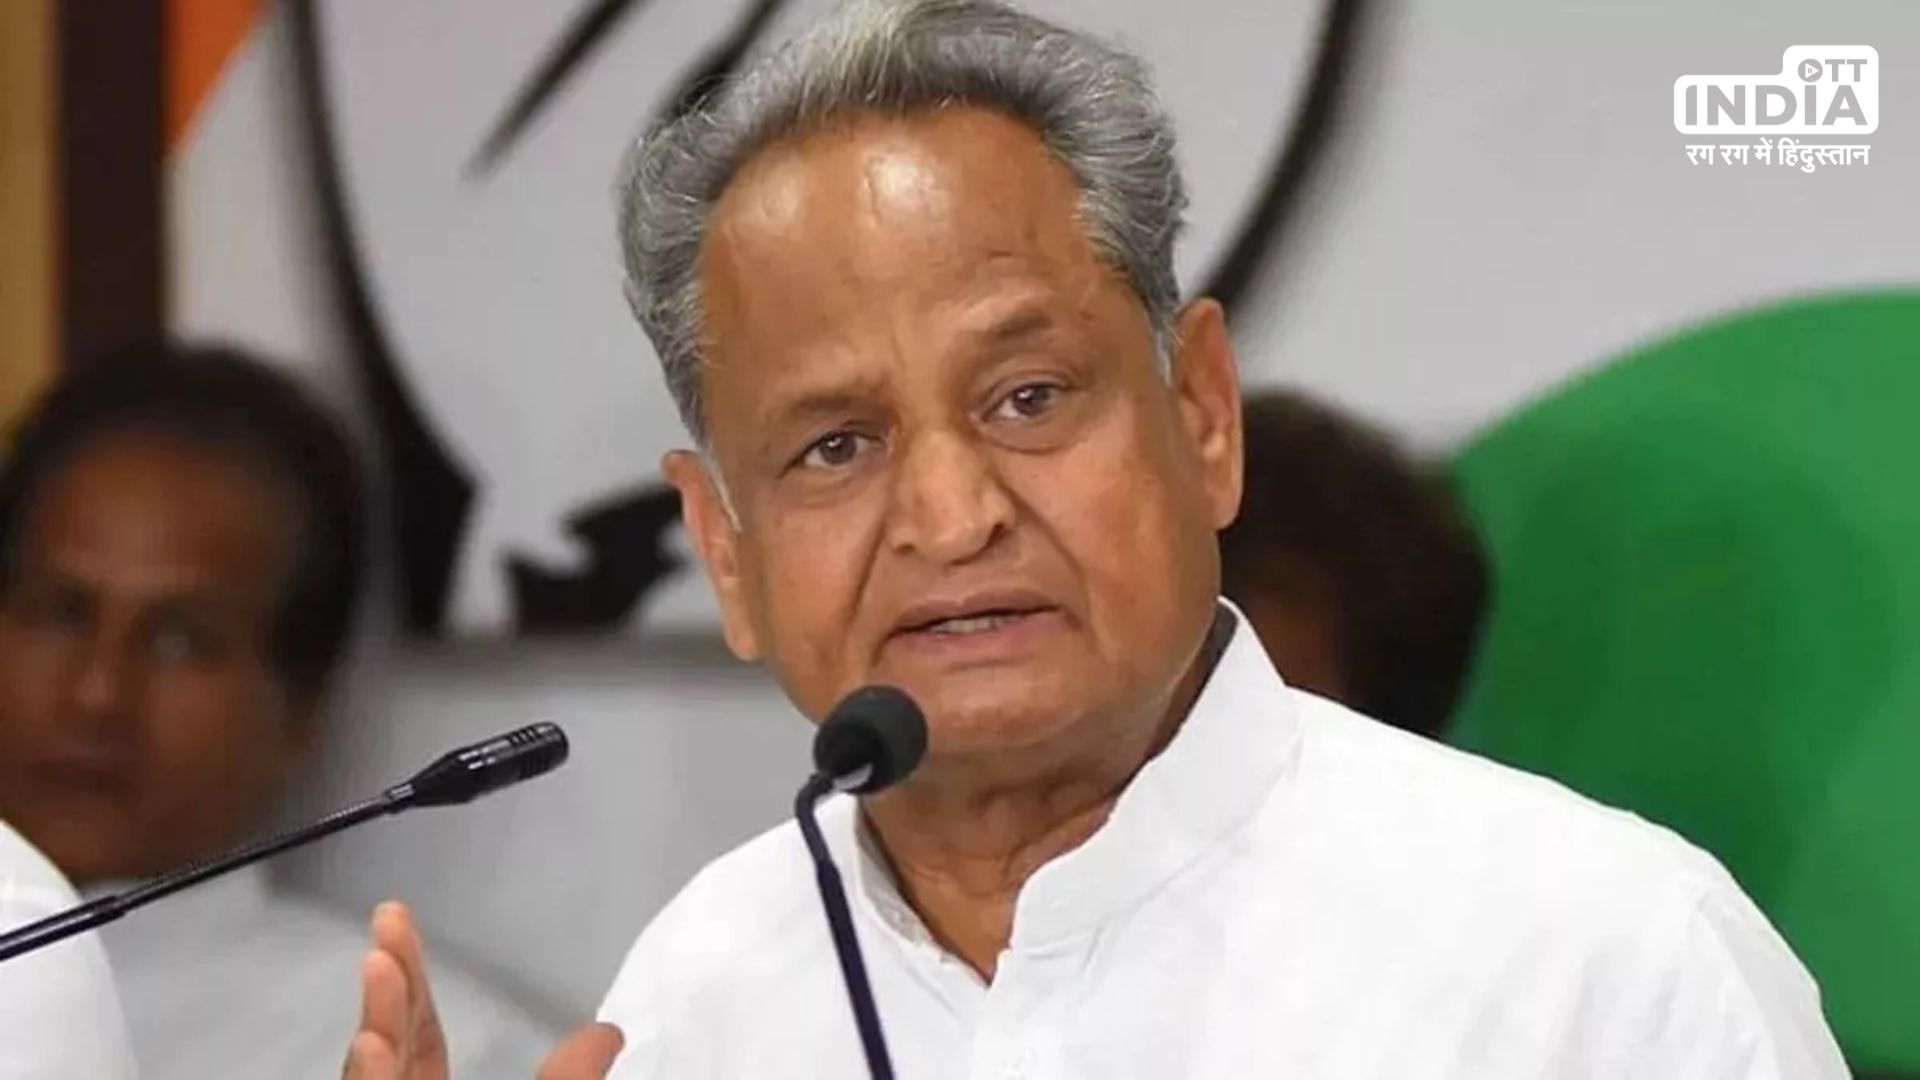 CM Ashok Gehlot said congress will win Rajasthan Election and make government again